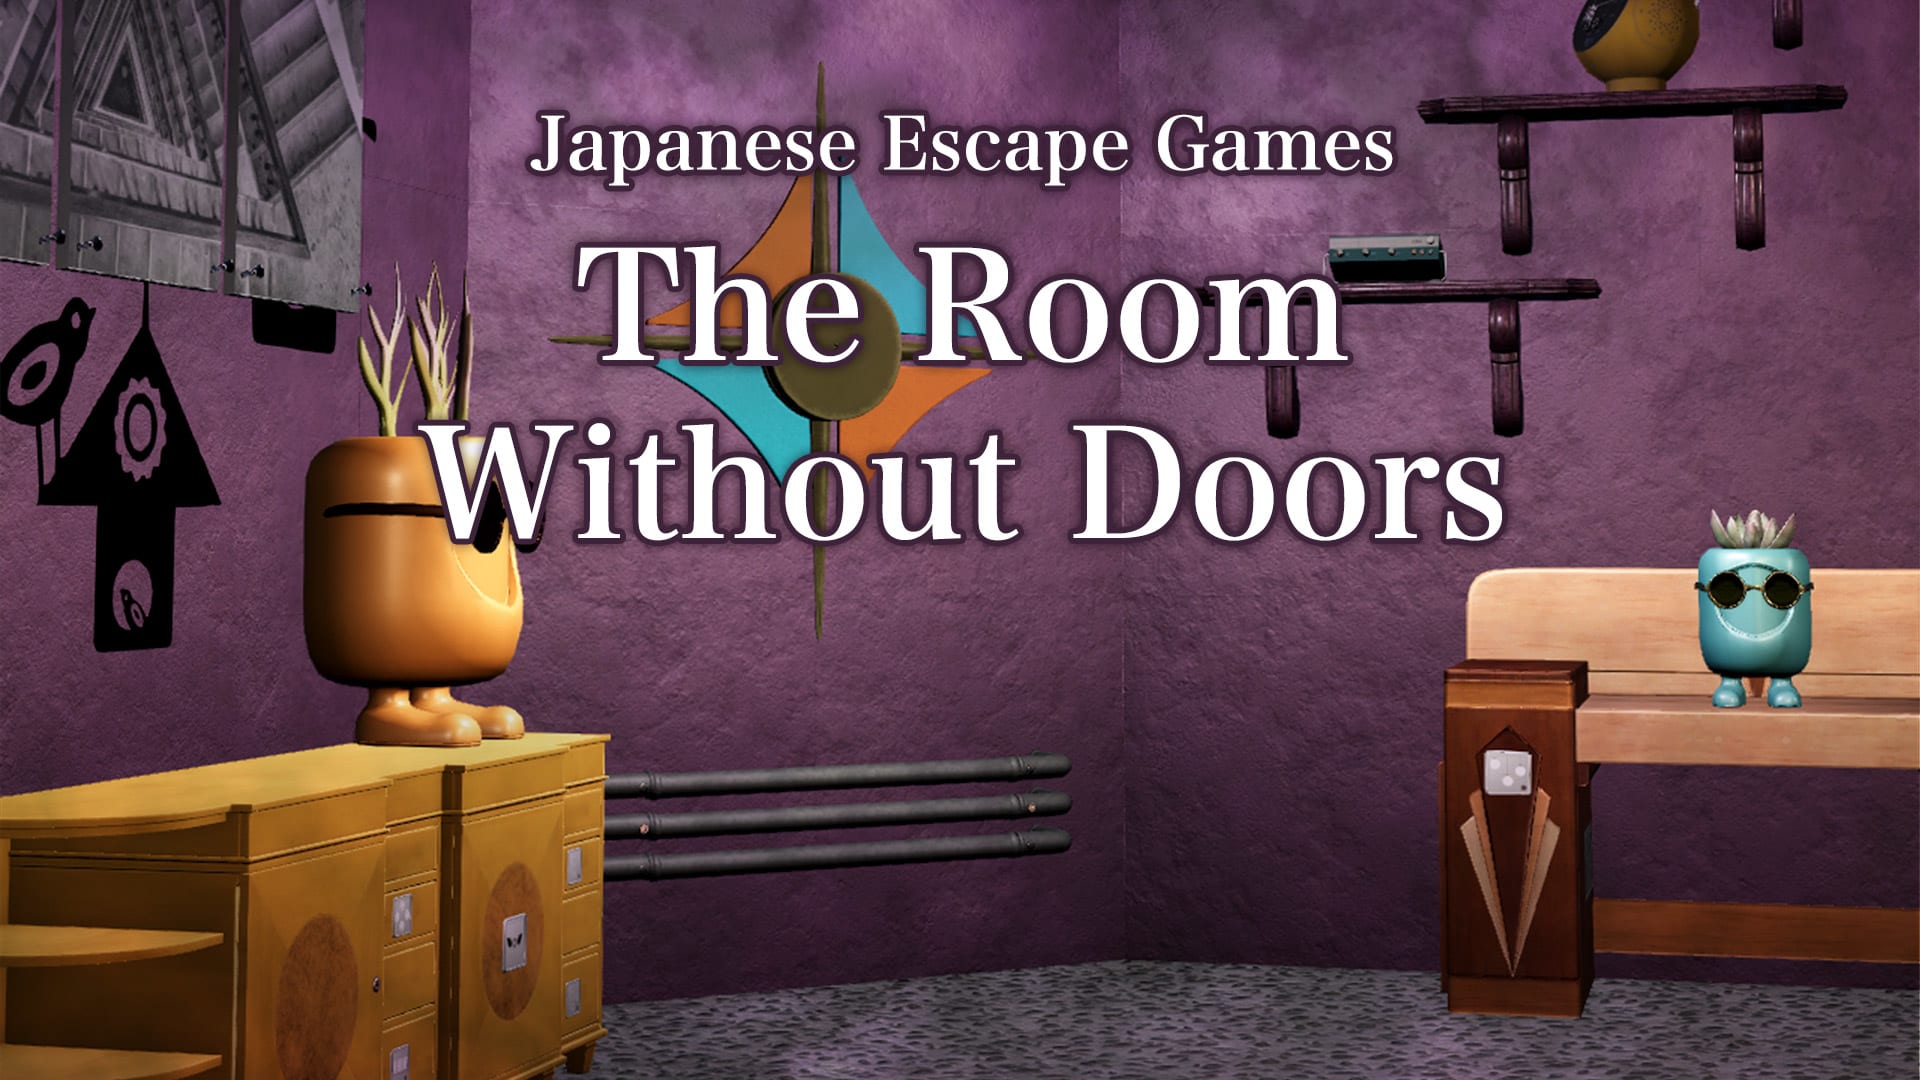 Japanese Escape Games The Room Without Doors